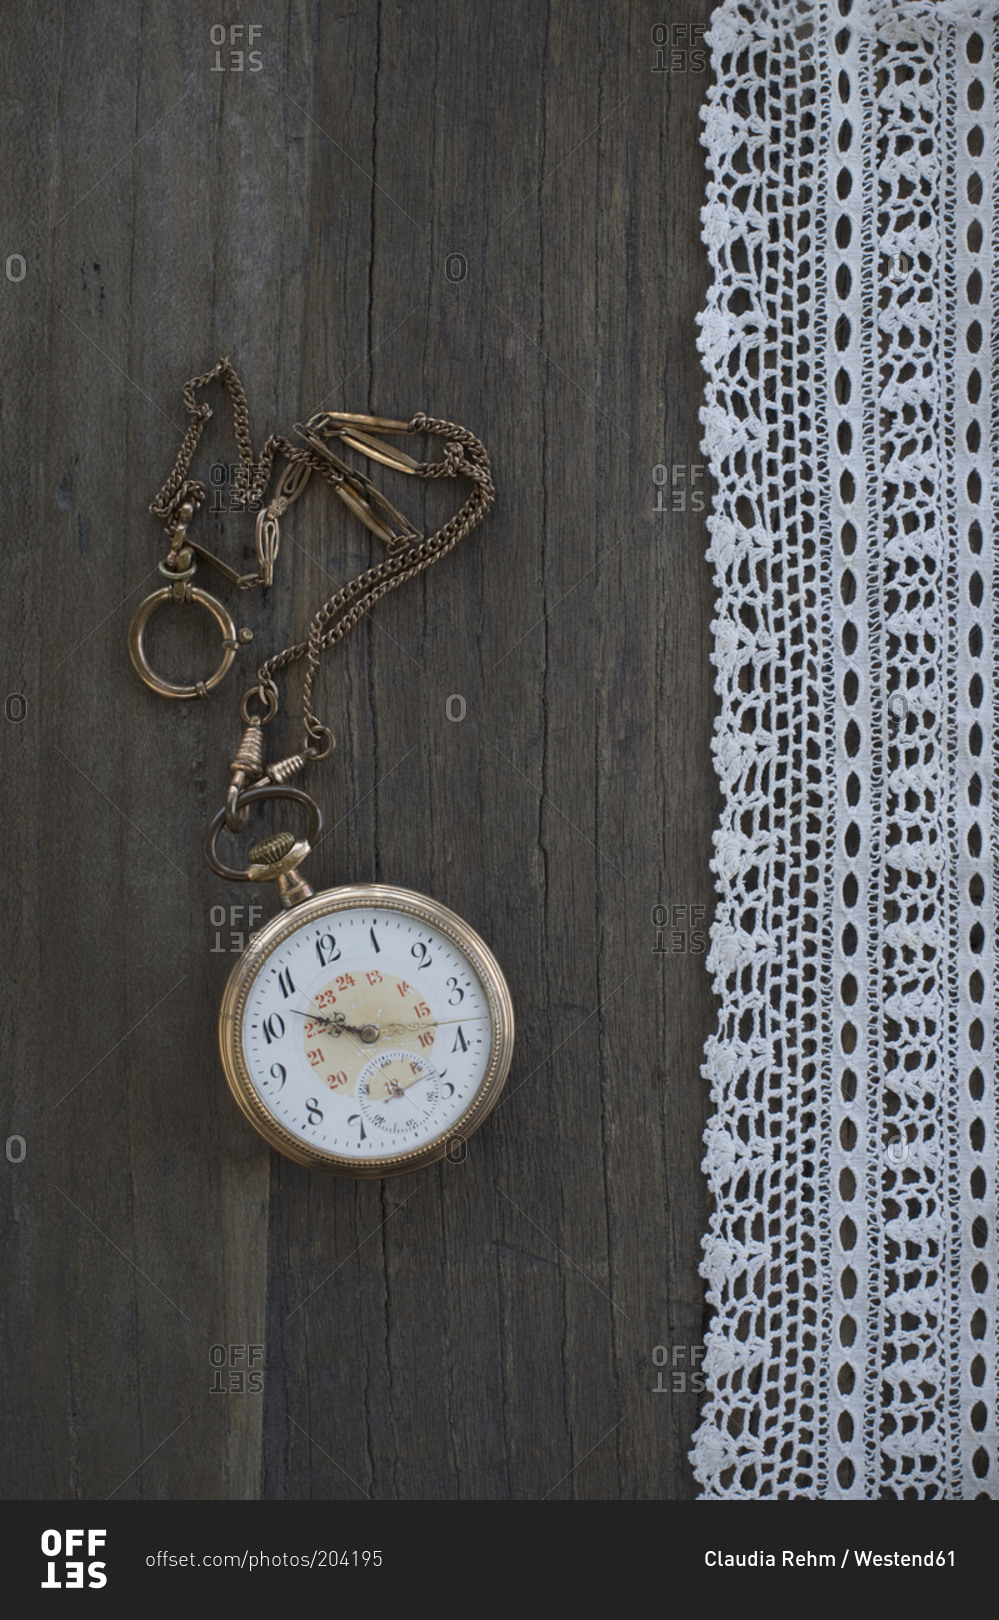 Old pocket watch and lace on dark wood